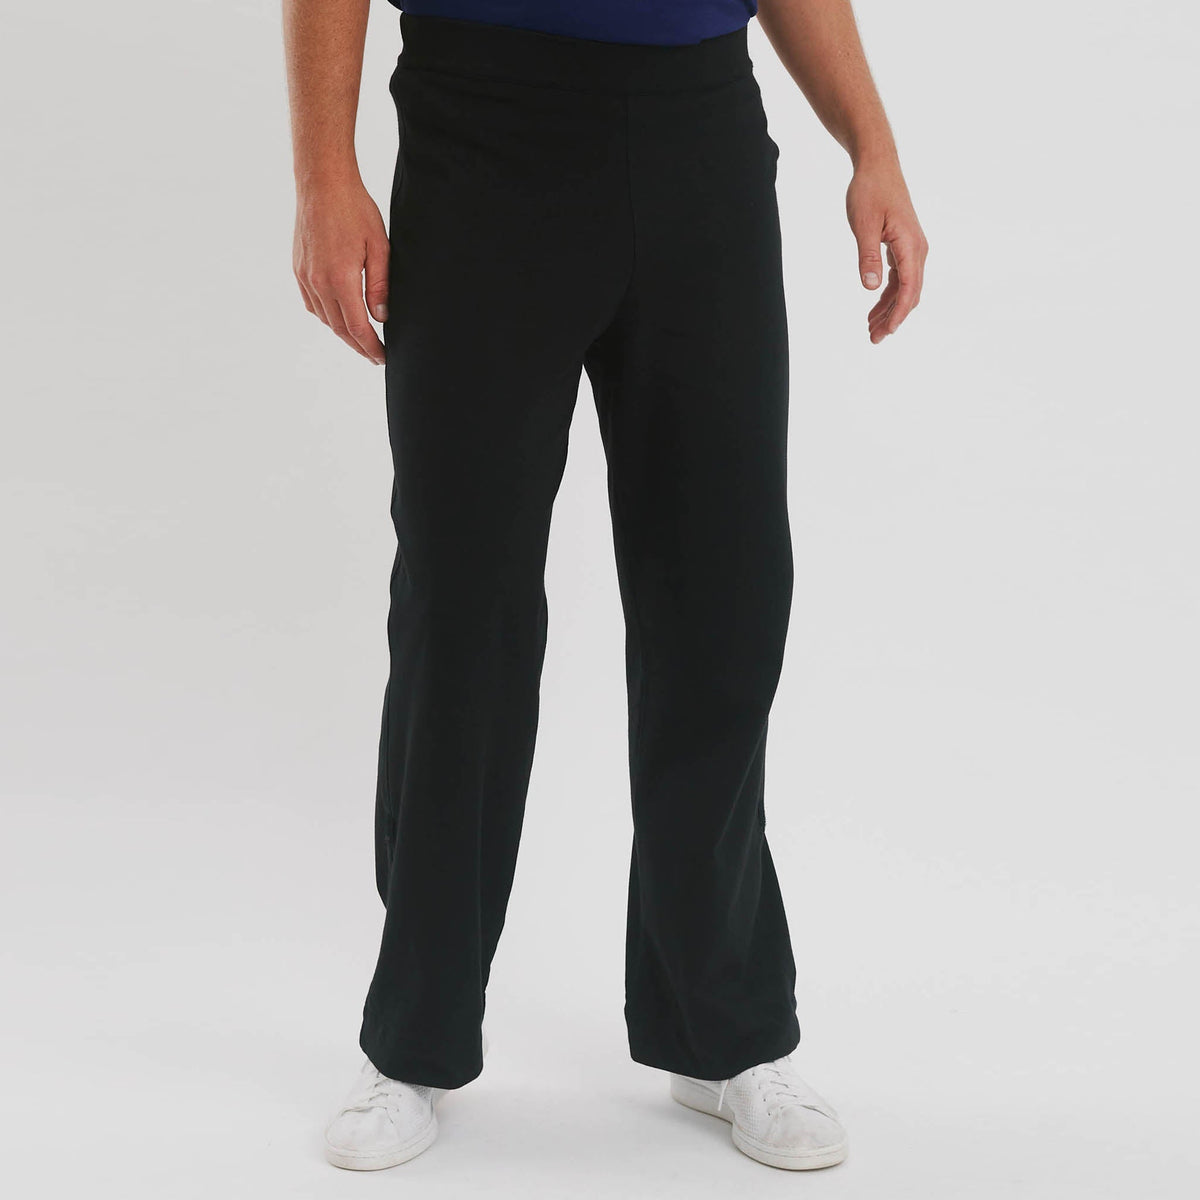 The Side Fastening Pants Mens - The Shapes United